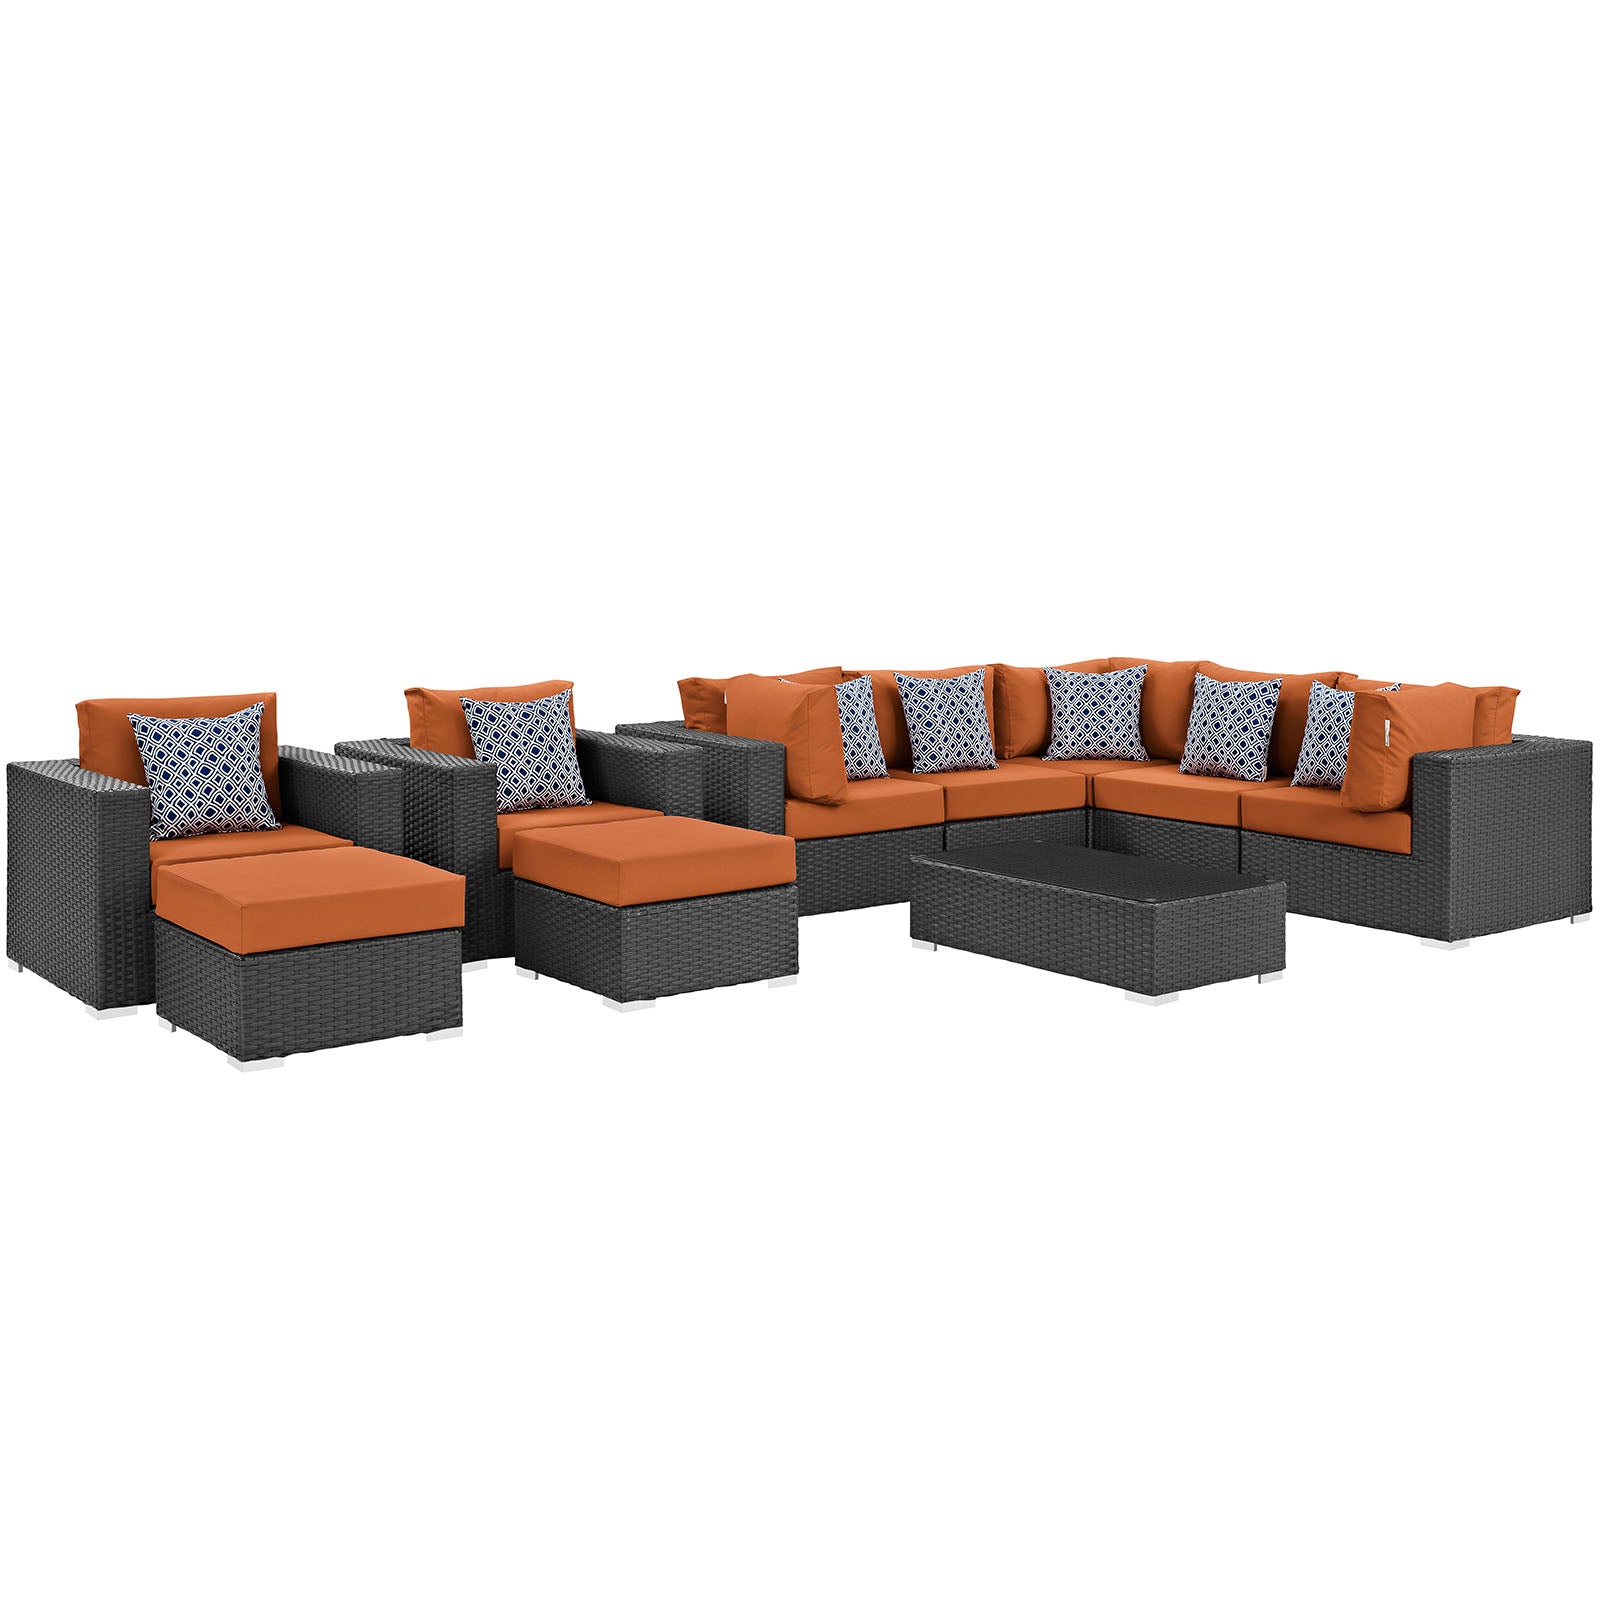 Sojourn 10 Piece Outdoor Patio Sunbrella® Sectional Set - East Shore Modern Home Furnishings